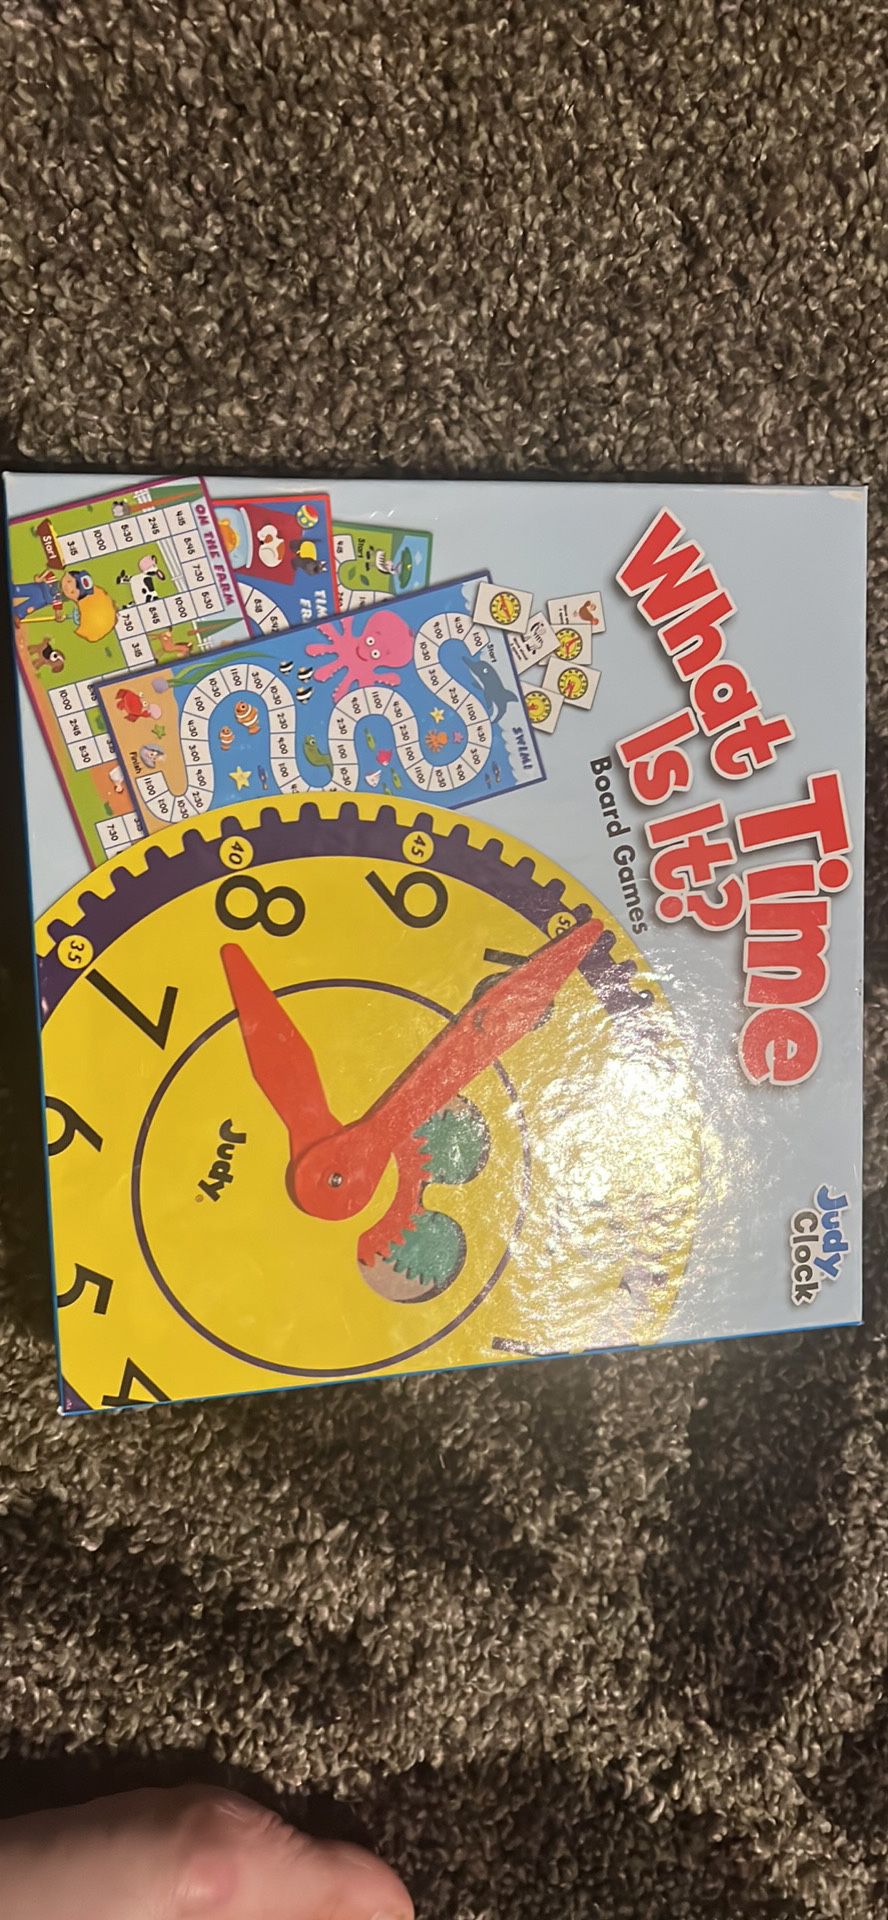 What time Is It Board Game